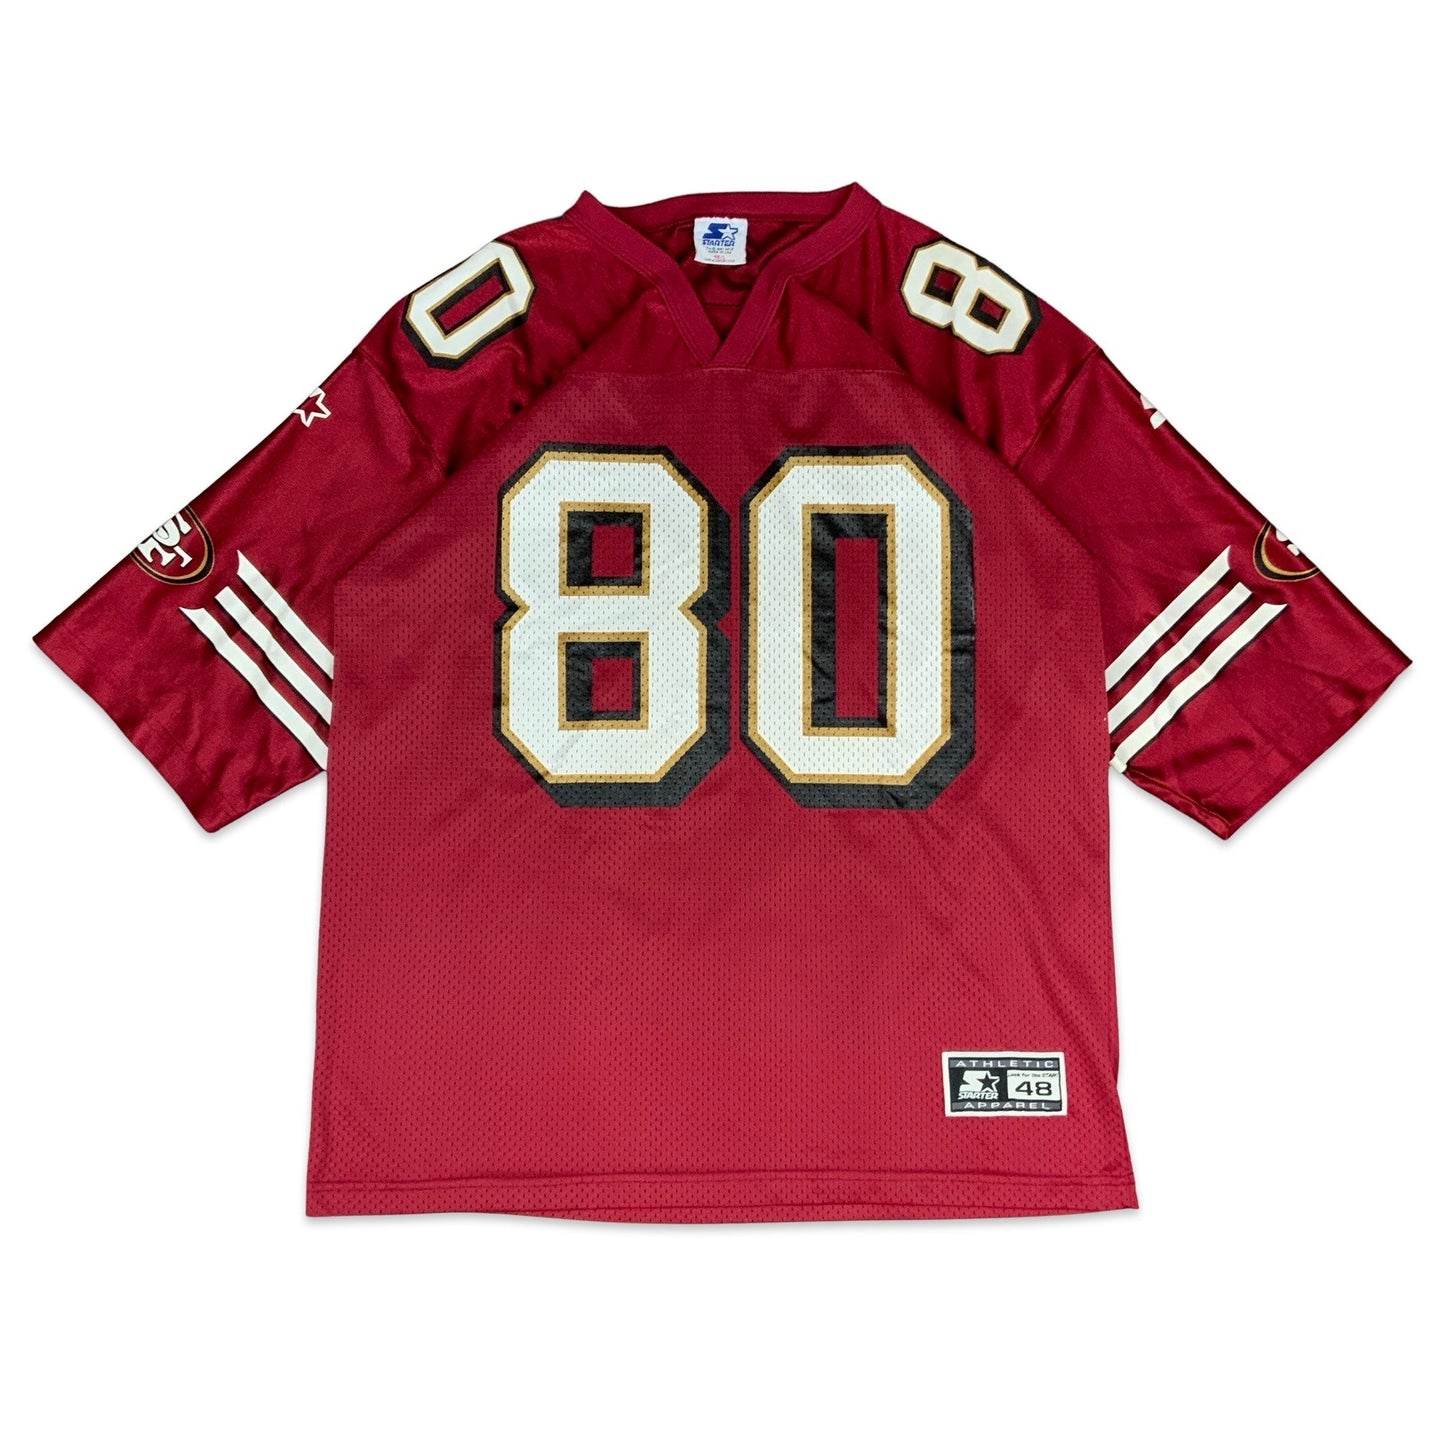 Vintage 90s San Francisco 49ers Jerry Rice Red Jersey M L